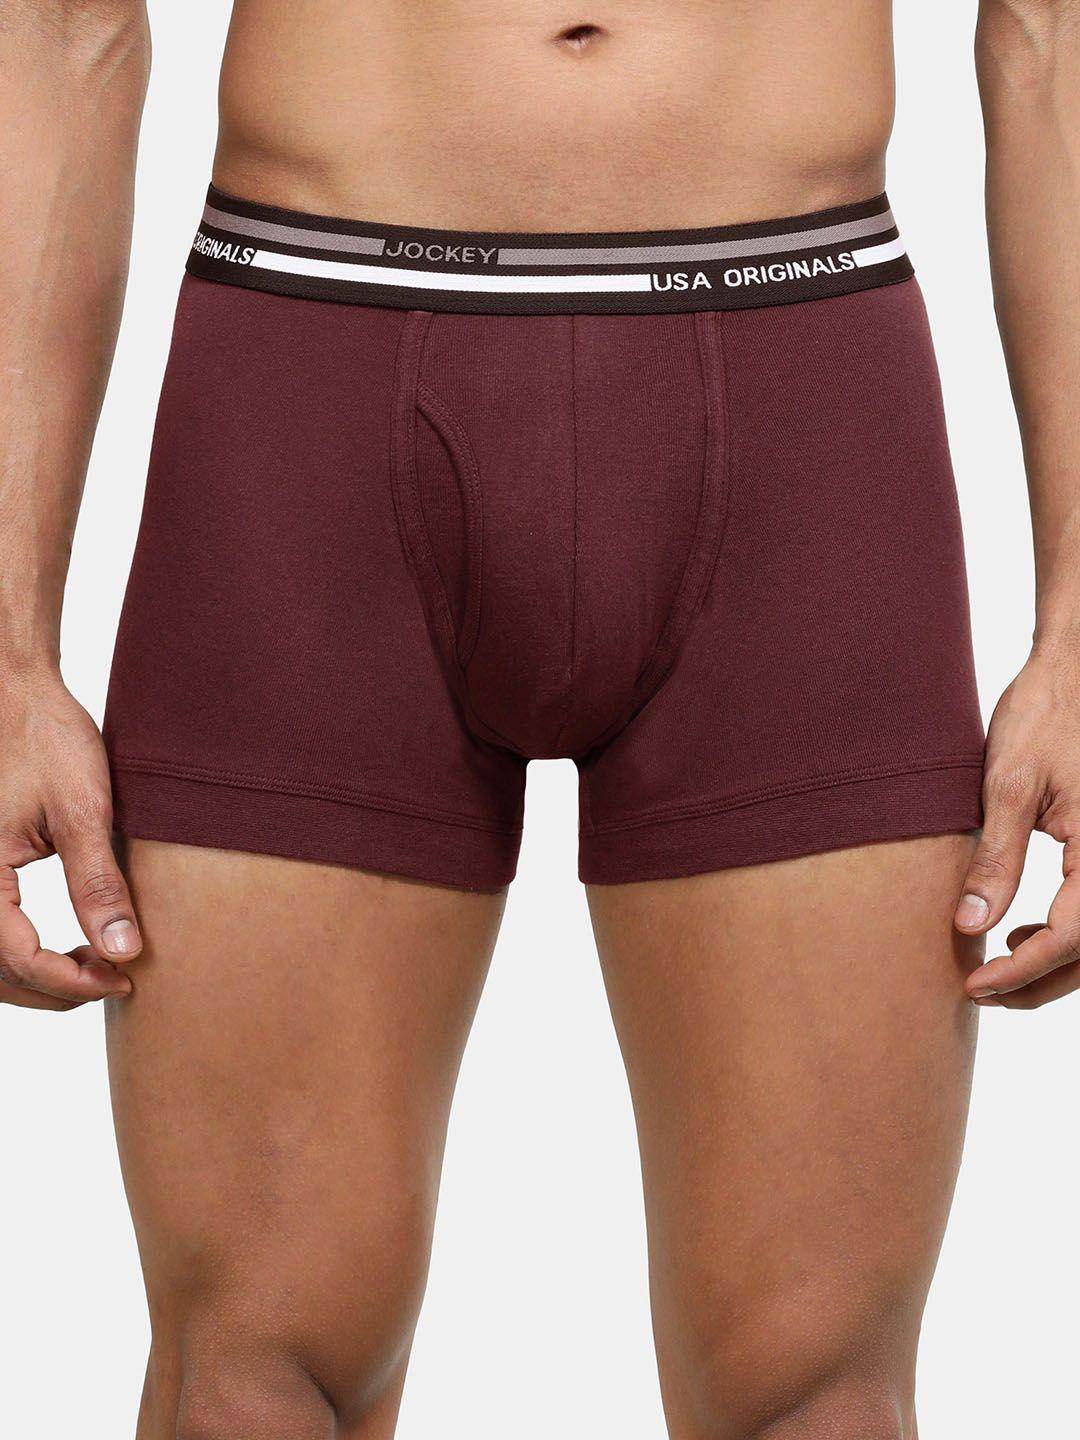 jockey men super combed cotton trunk with ultrasoft and durable waistband ui22-0105-wintg